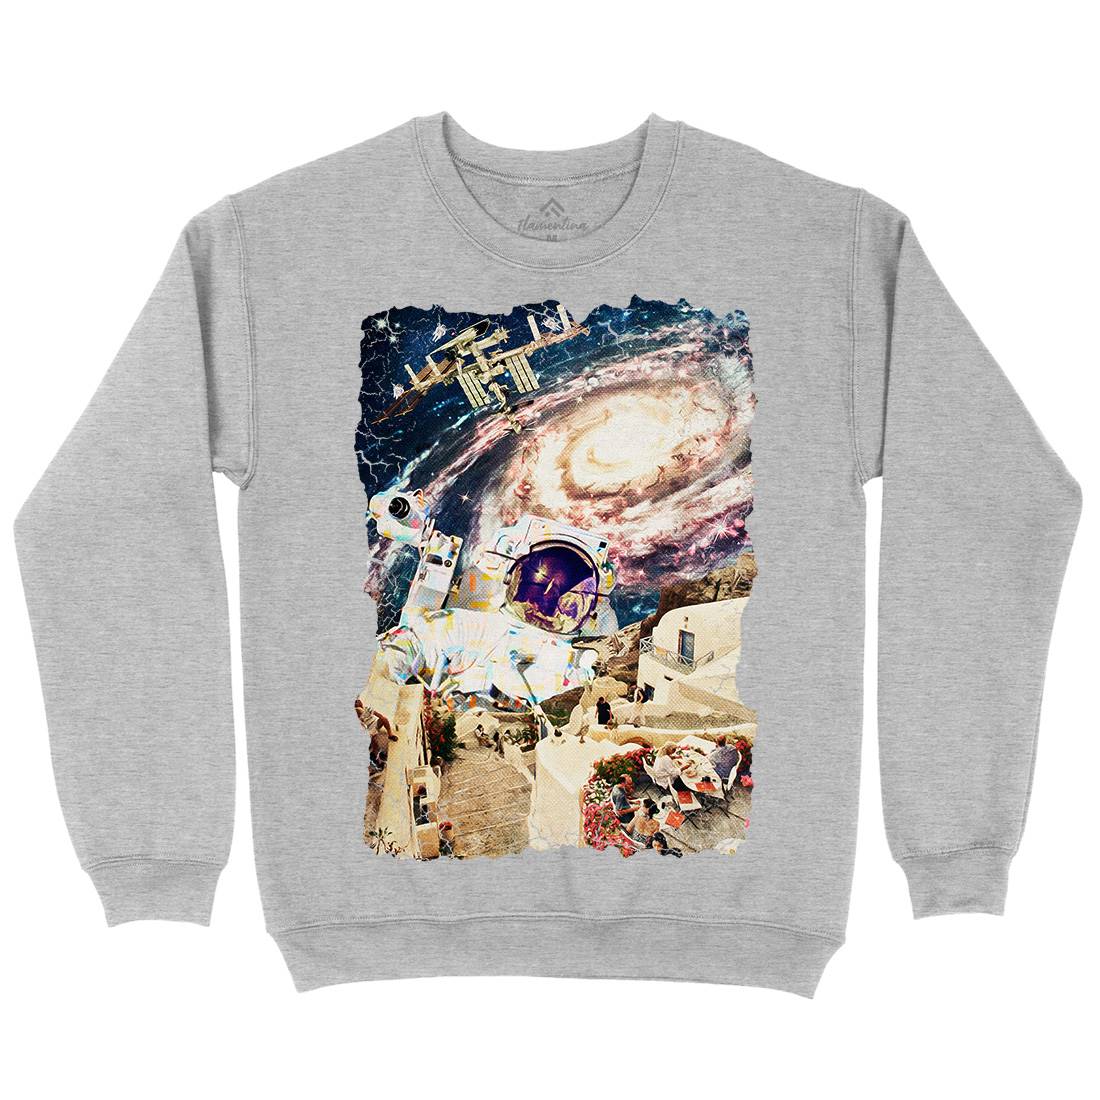 Stepped Out Kids Crew Neck Sweatshirt Space A914